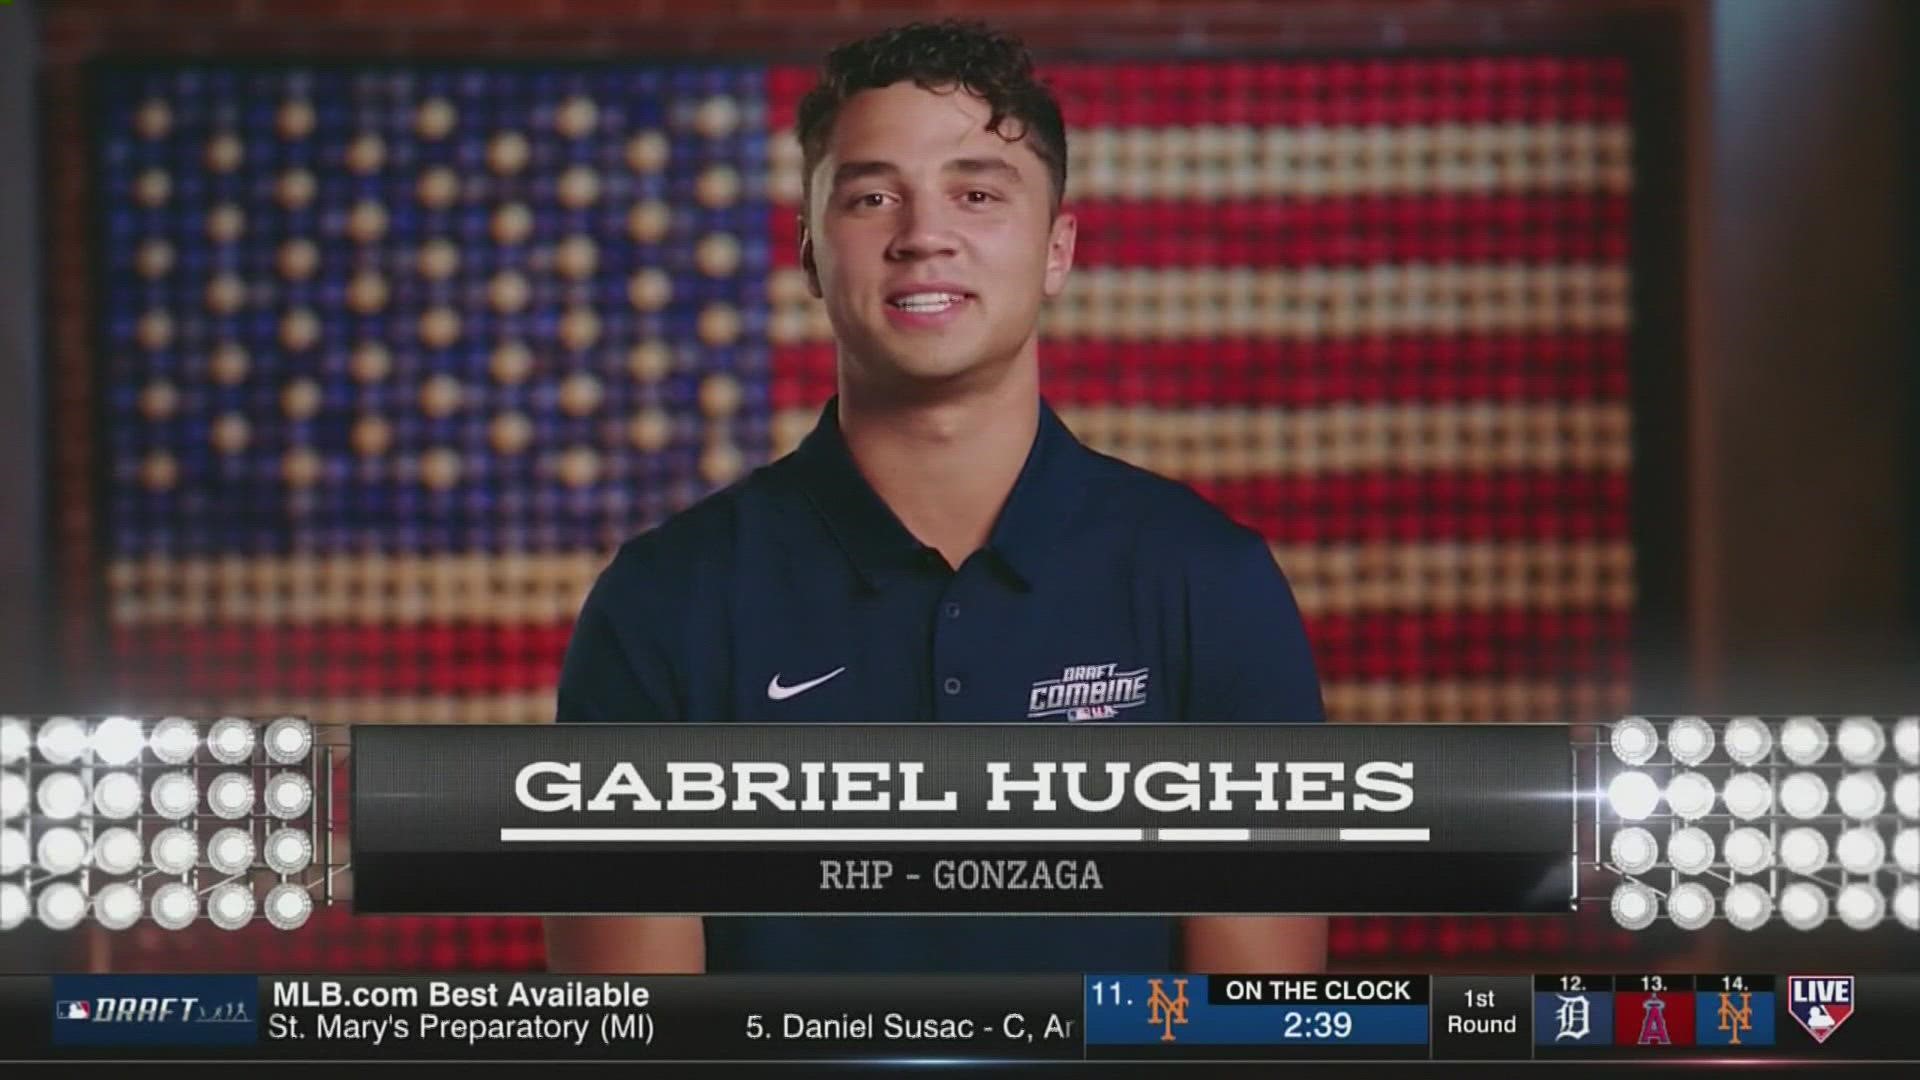 Hughes became the highest-drafted Zag in program history when the Colorado Rockies took him with the 10th overall pick in the MLB Draft.